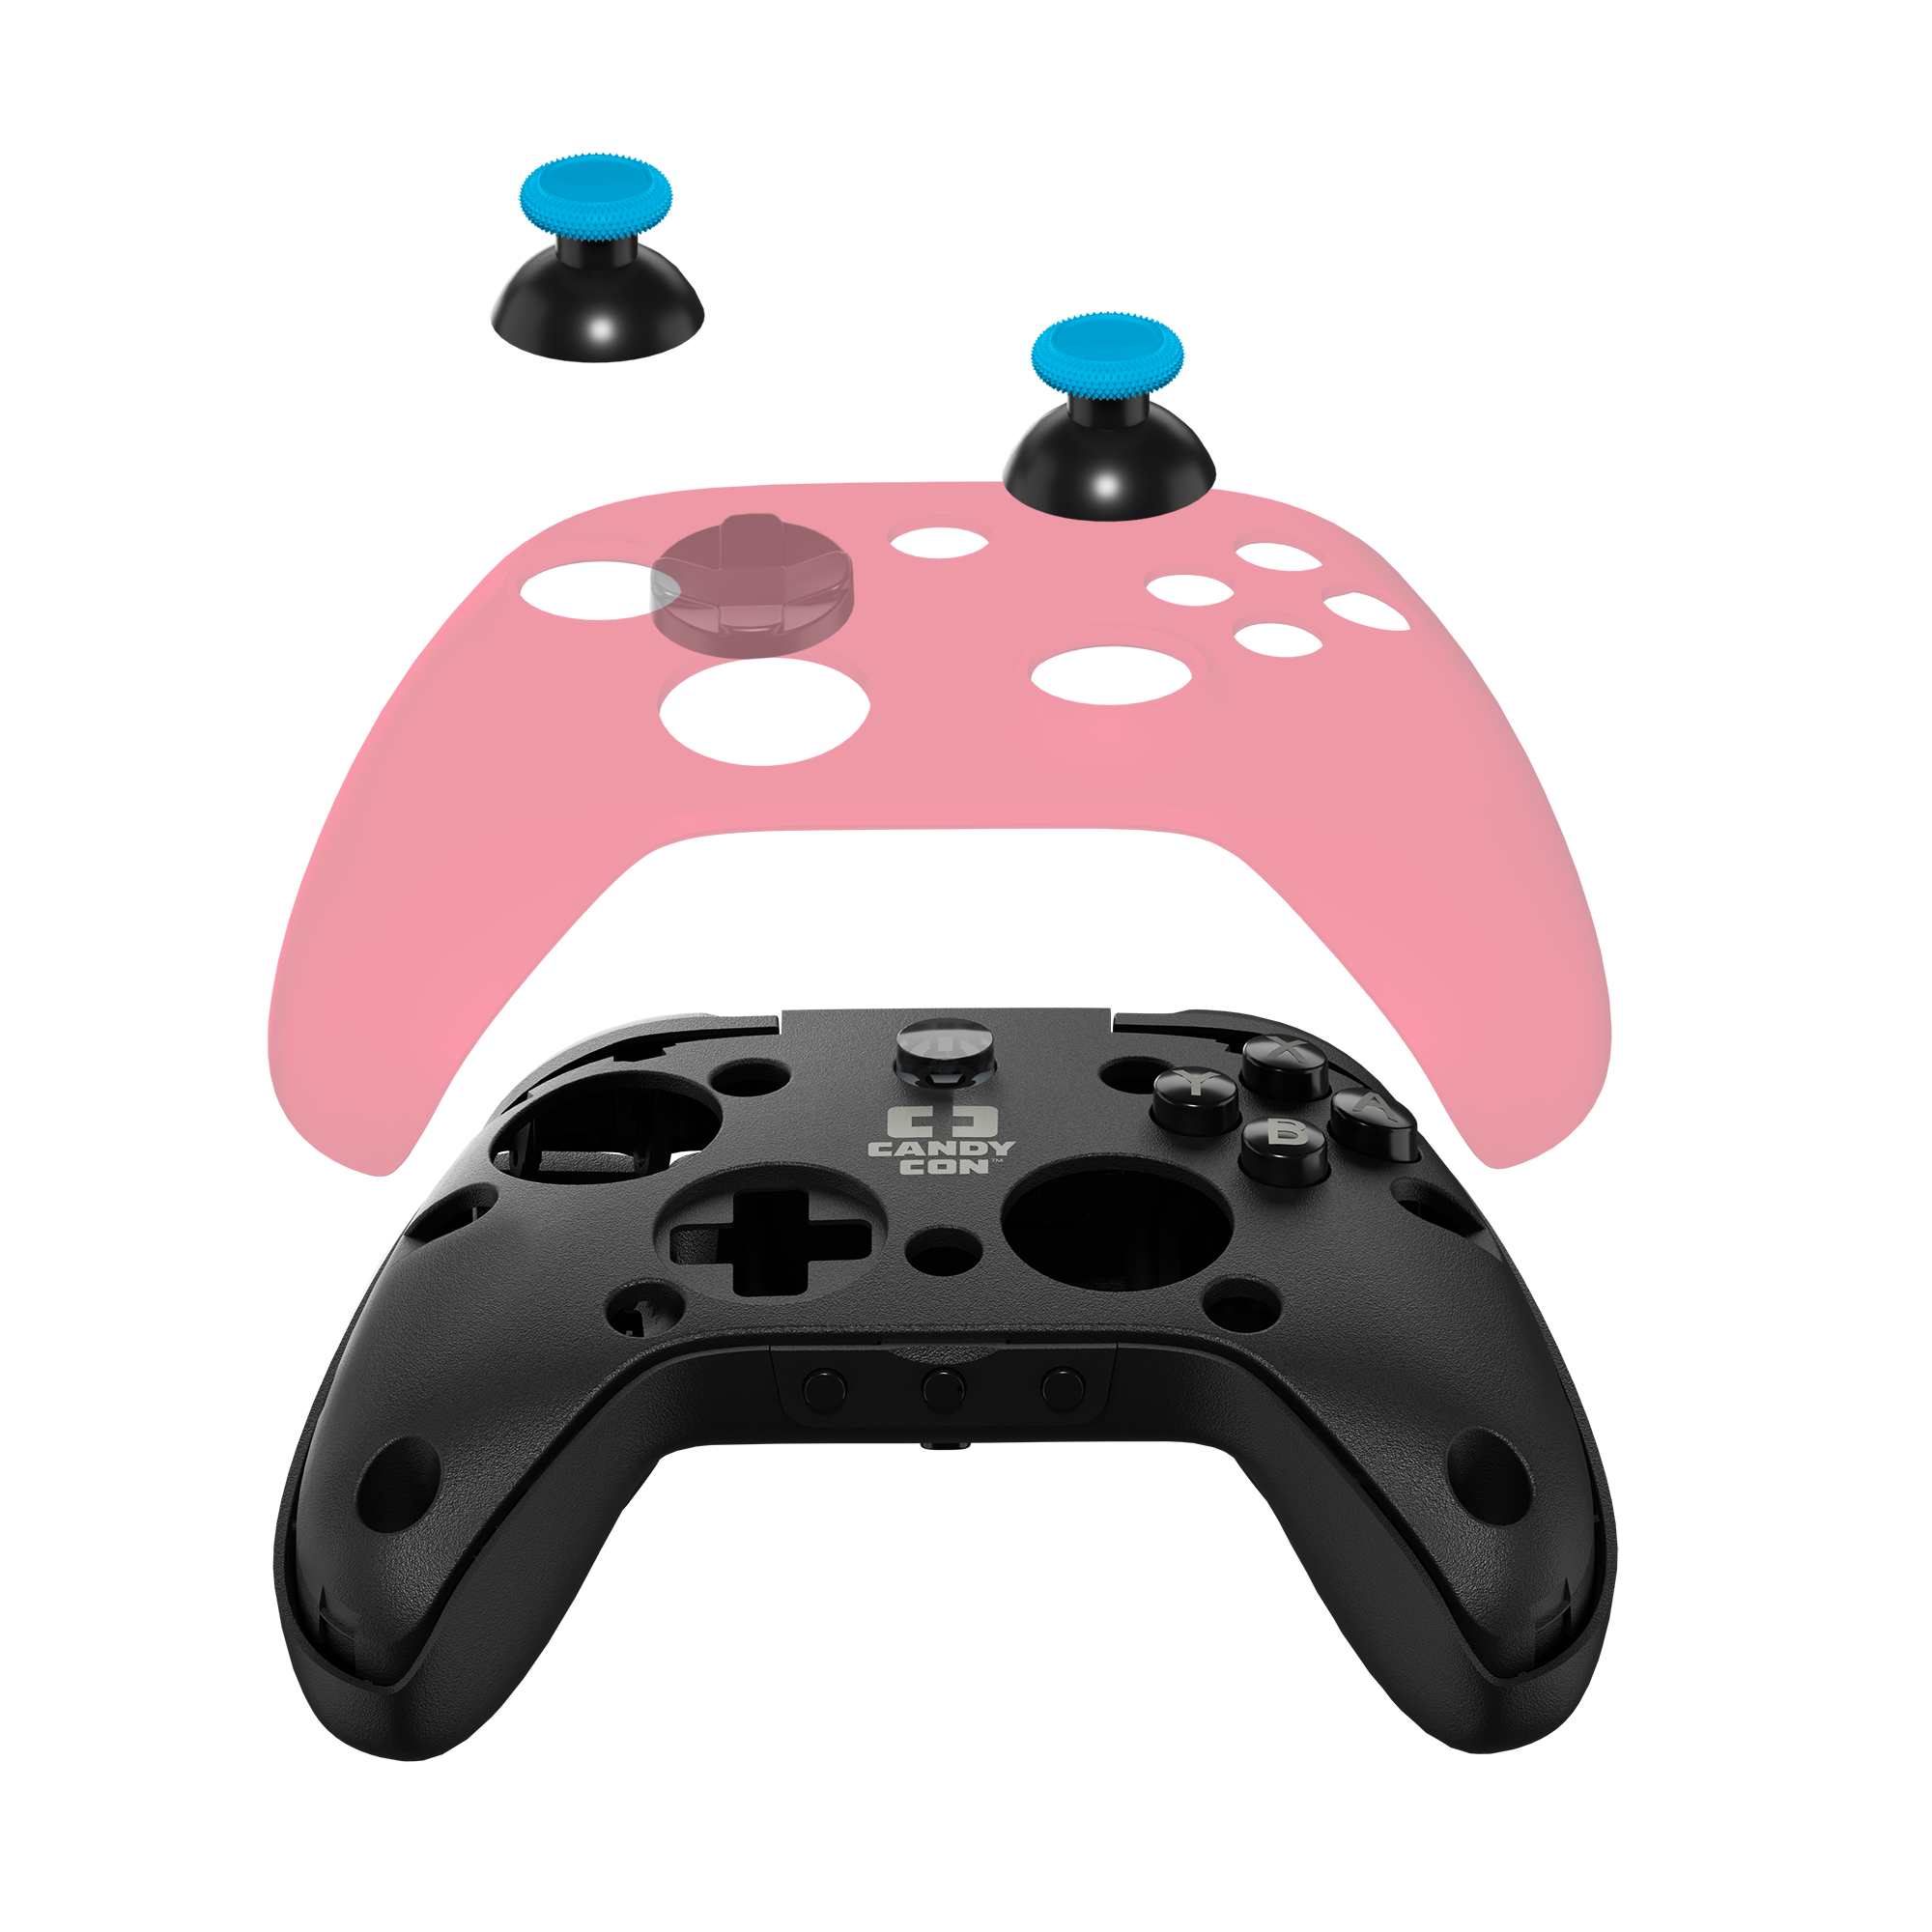 Candy Con Thumb Stick for Candy Con Controllers Cyan Blast